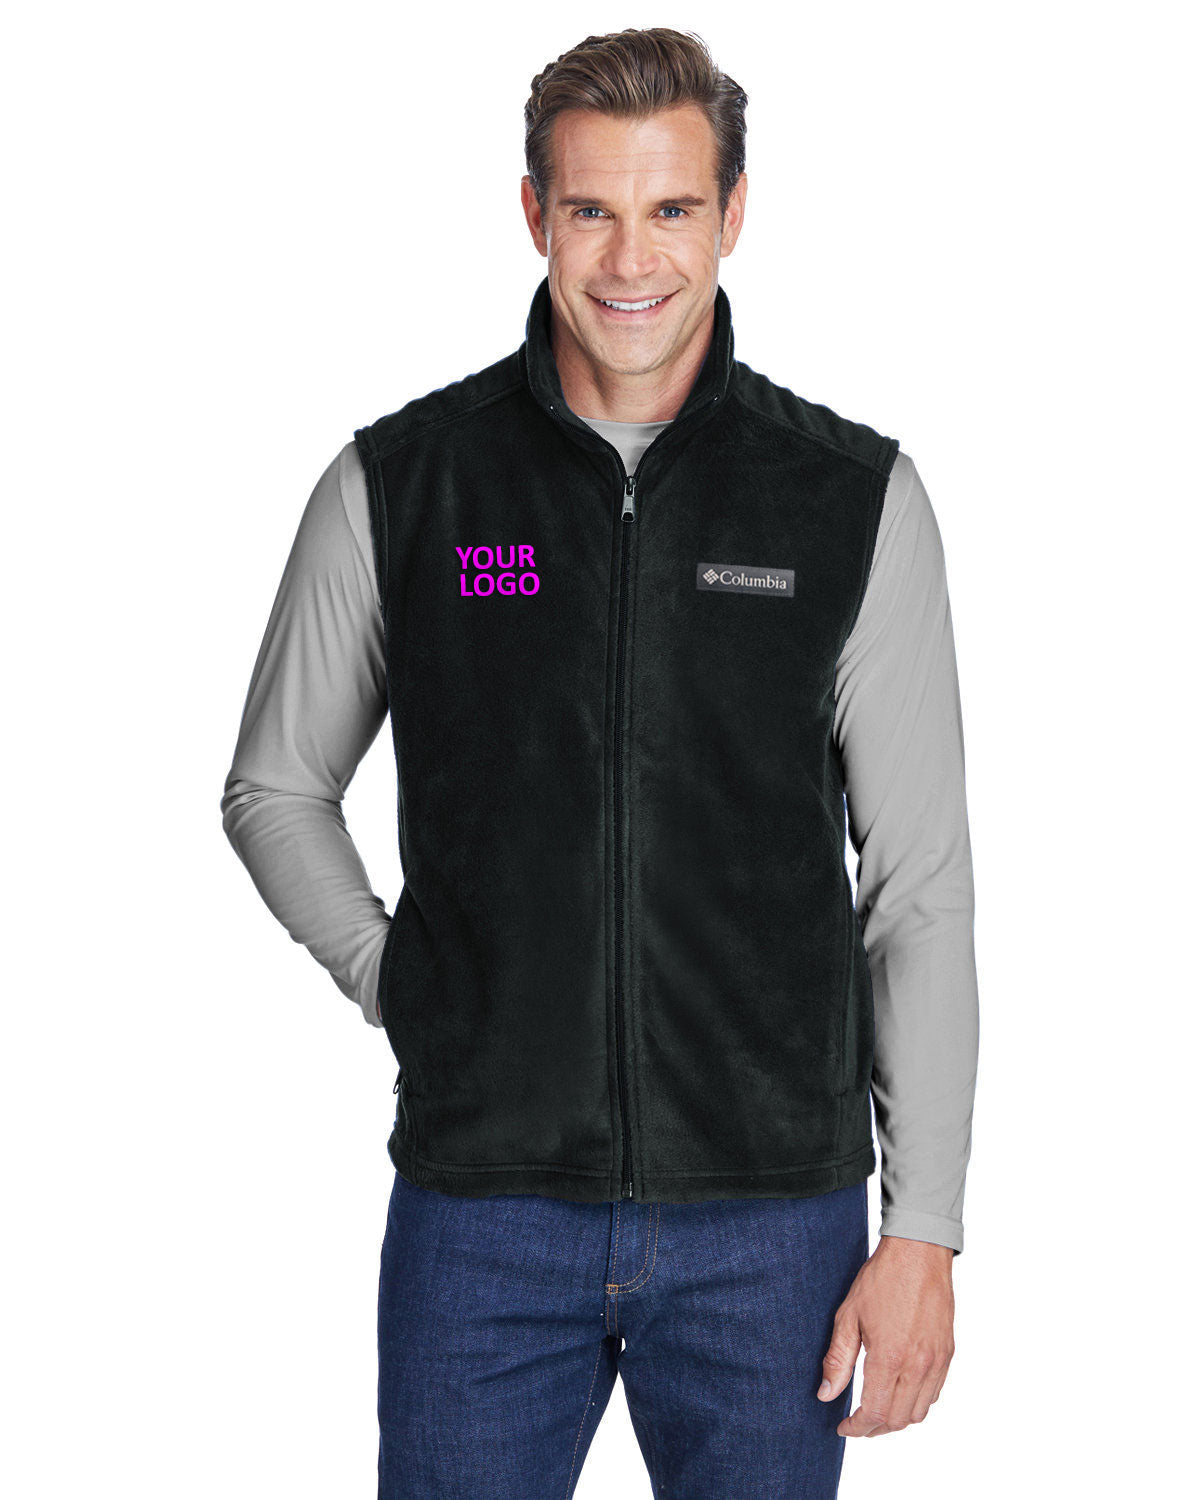 Columbia Black 6747 embroidered jackets for business